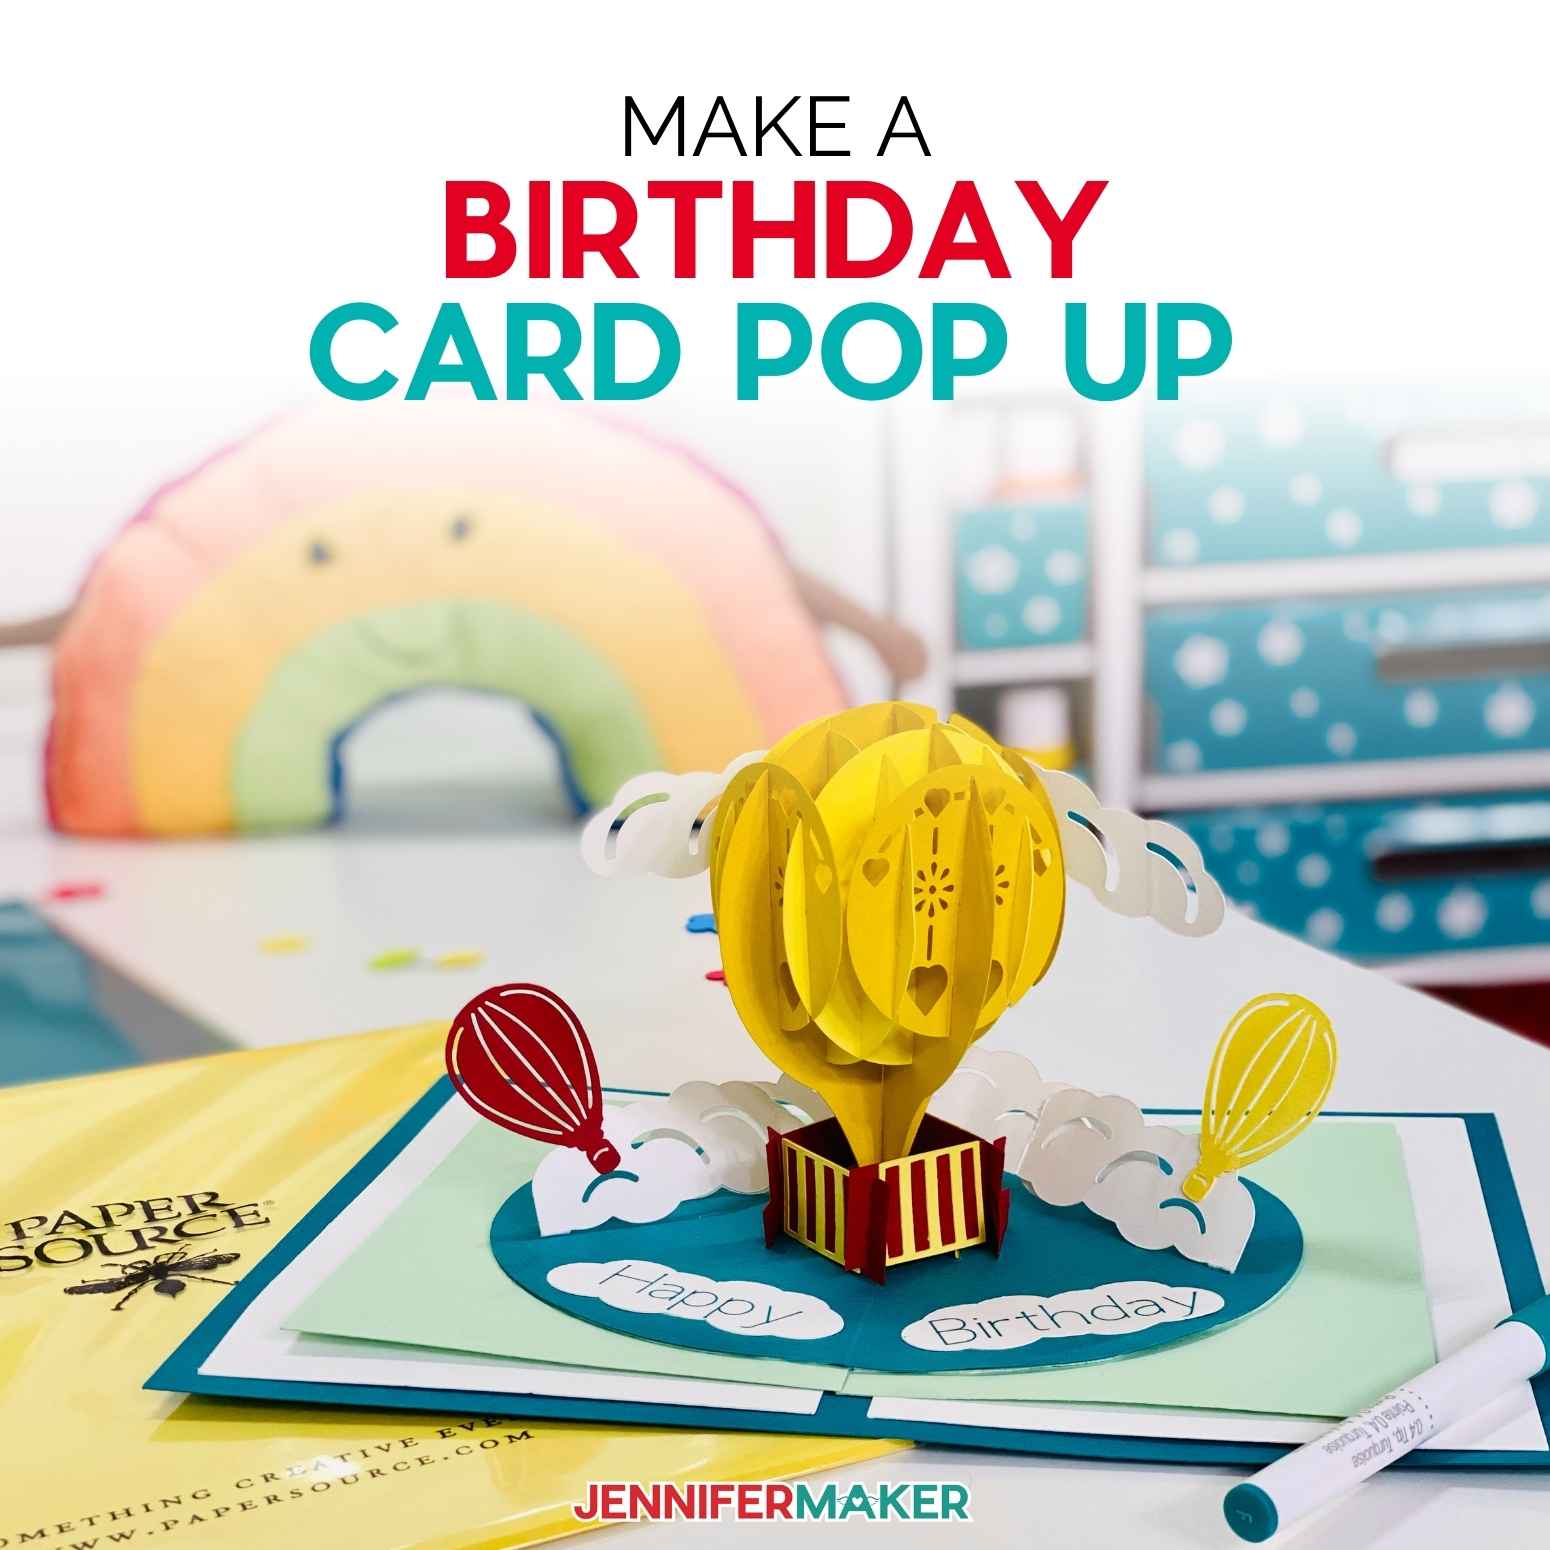 Colorful hot air balloon birthday card pop up design on a desk.